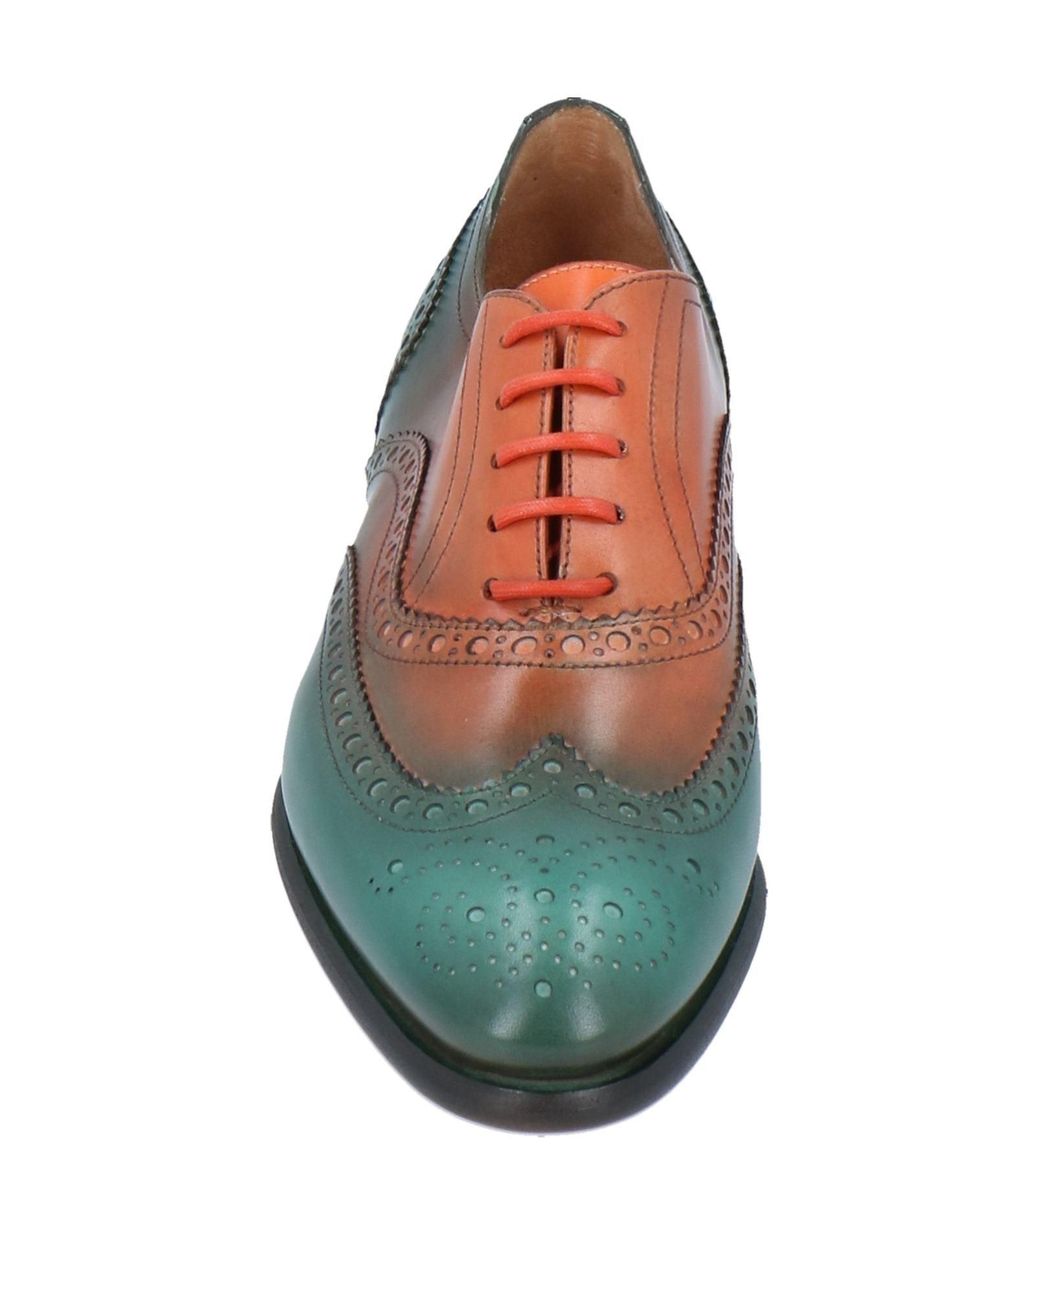 Santoni Leather Lace-up Shoes in Green - Lyst